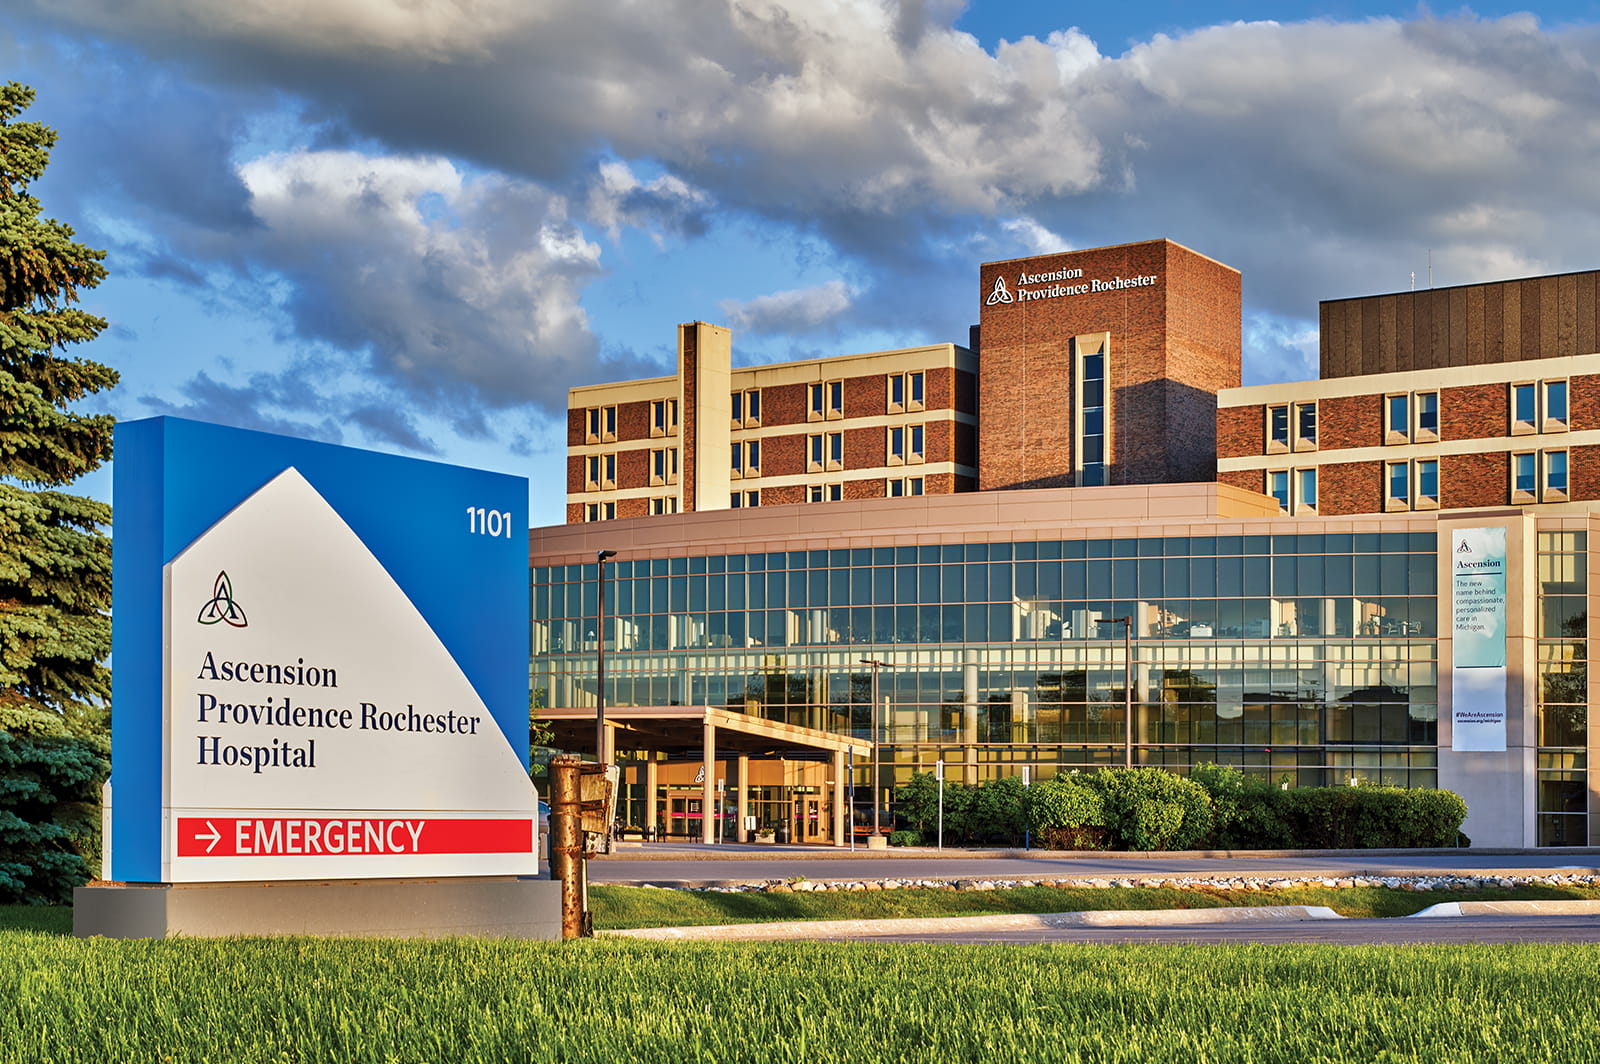 Ascension Providence Rochester Hospital at 1101 W University Dr. in Rochester, Michigan. 